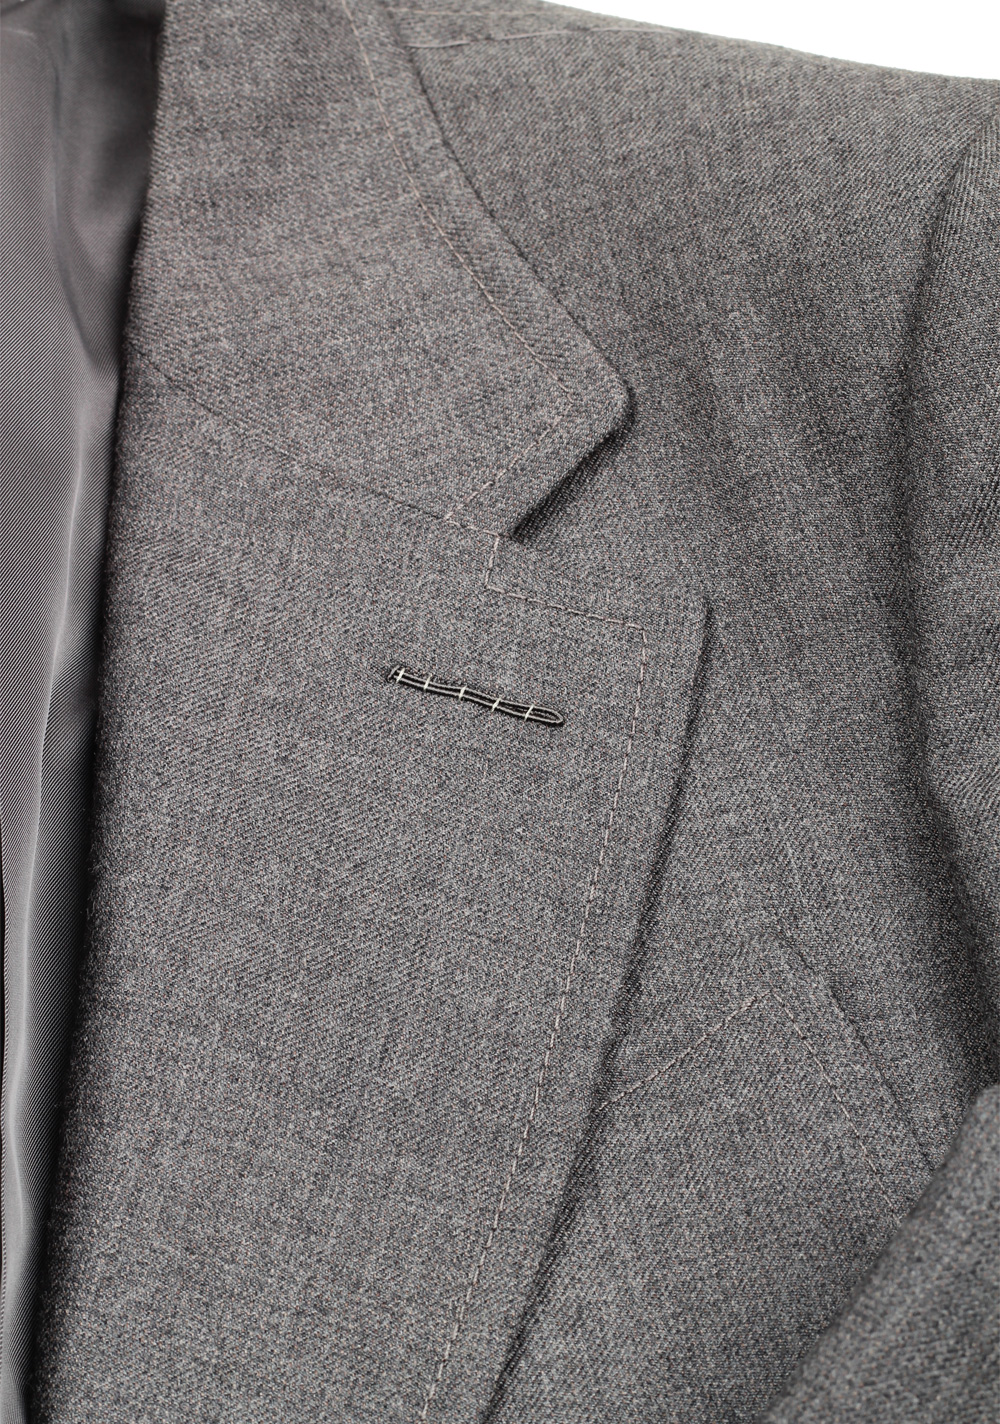 TOM FORD Shelton Gray Suit Size 46 / 36R U.S. In Wool | Costume Limité